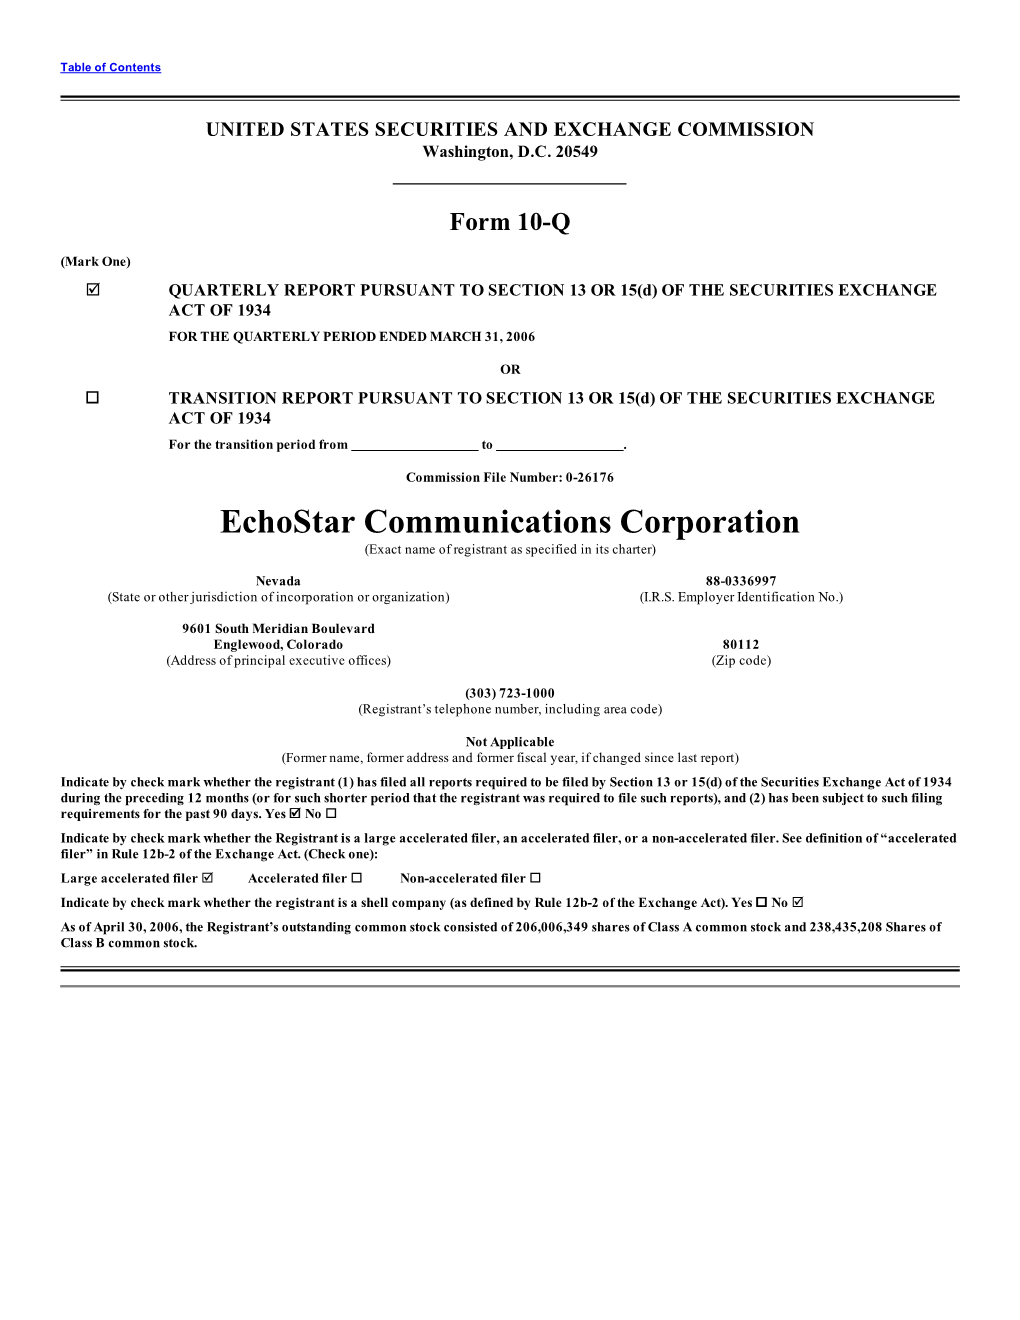 Echostar Communications Corporation (Exact Name of Registrant As Specified in Its Charter)